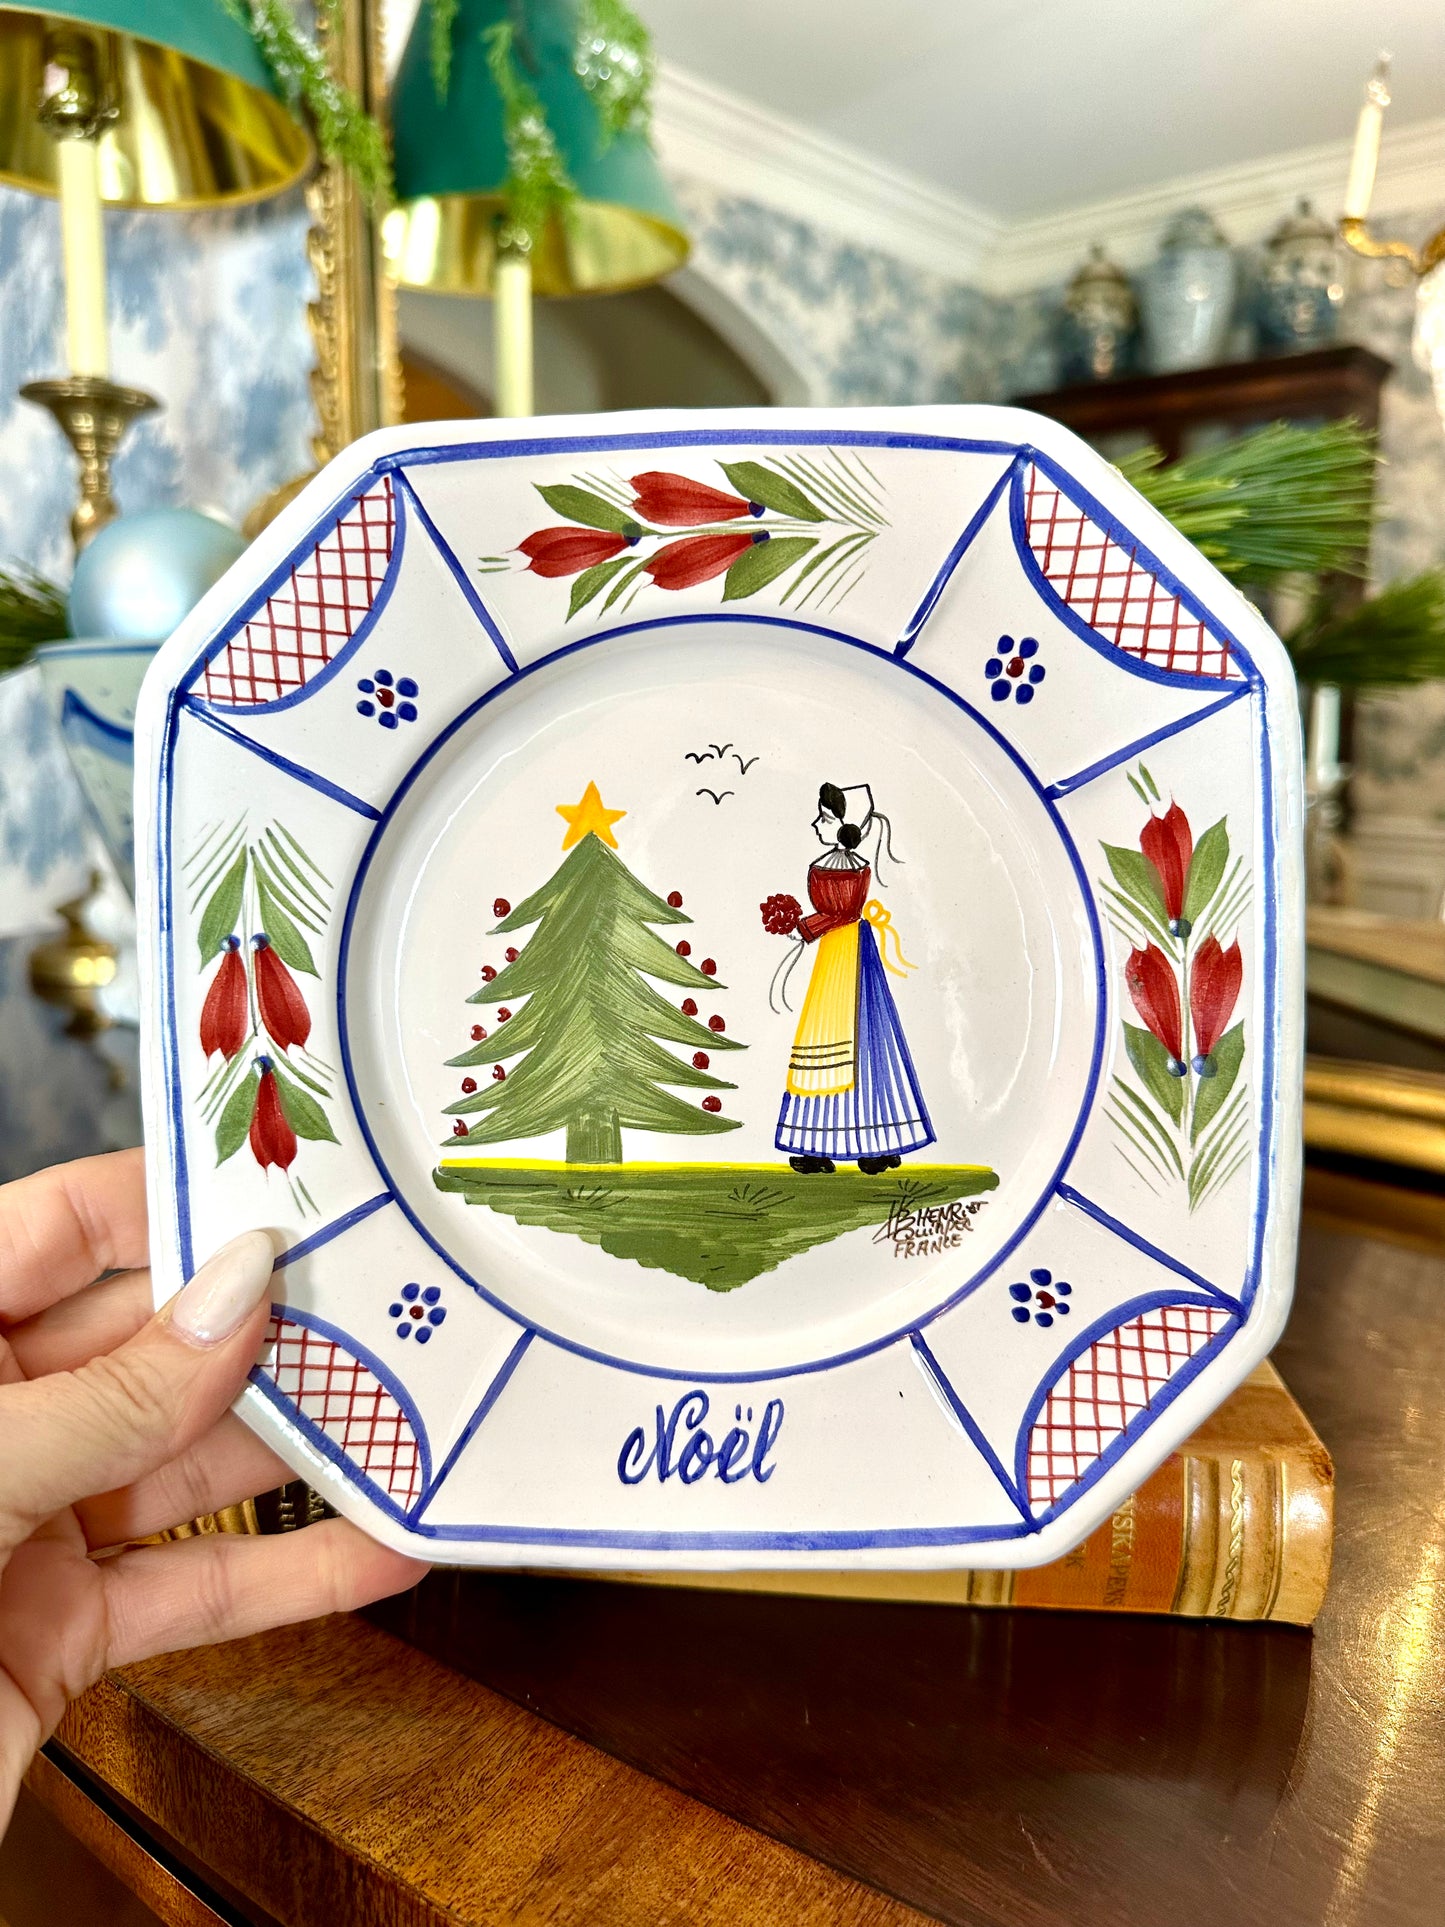 Christmas Henriot Quimper “Noel” 2003 French Faience Plate